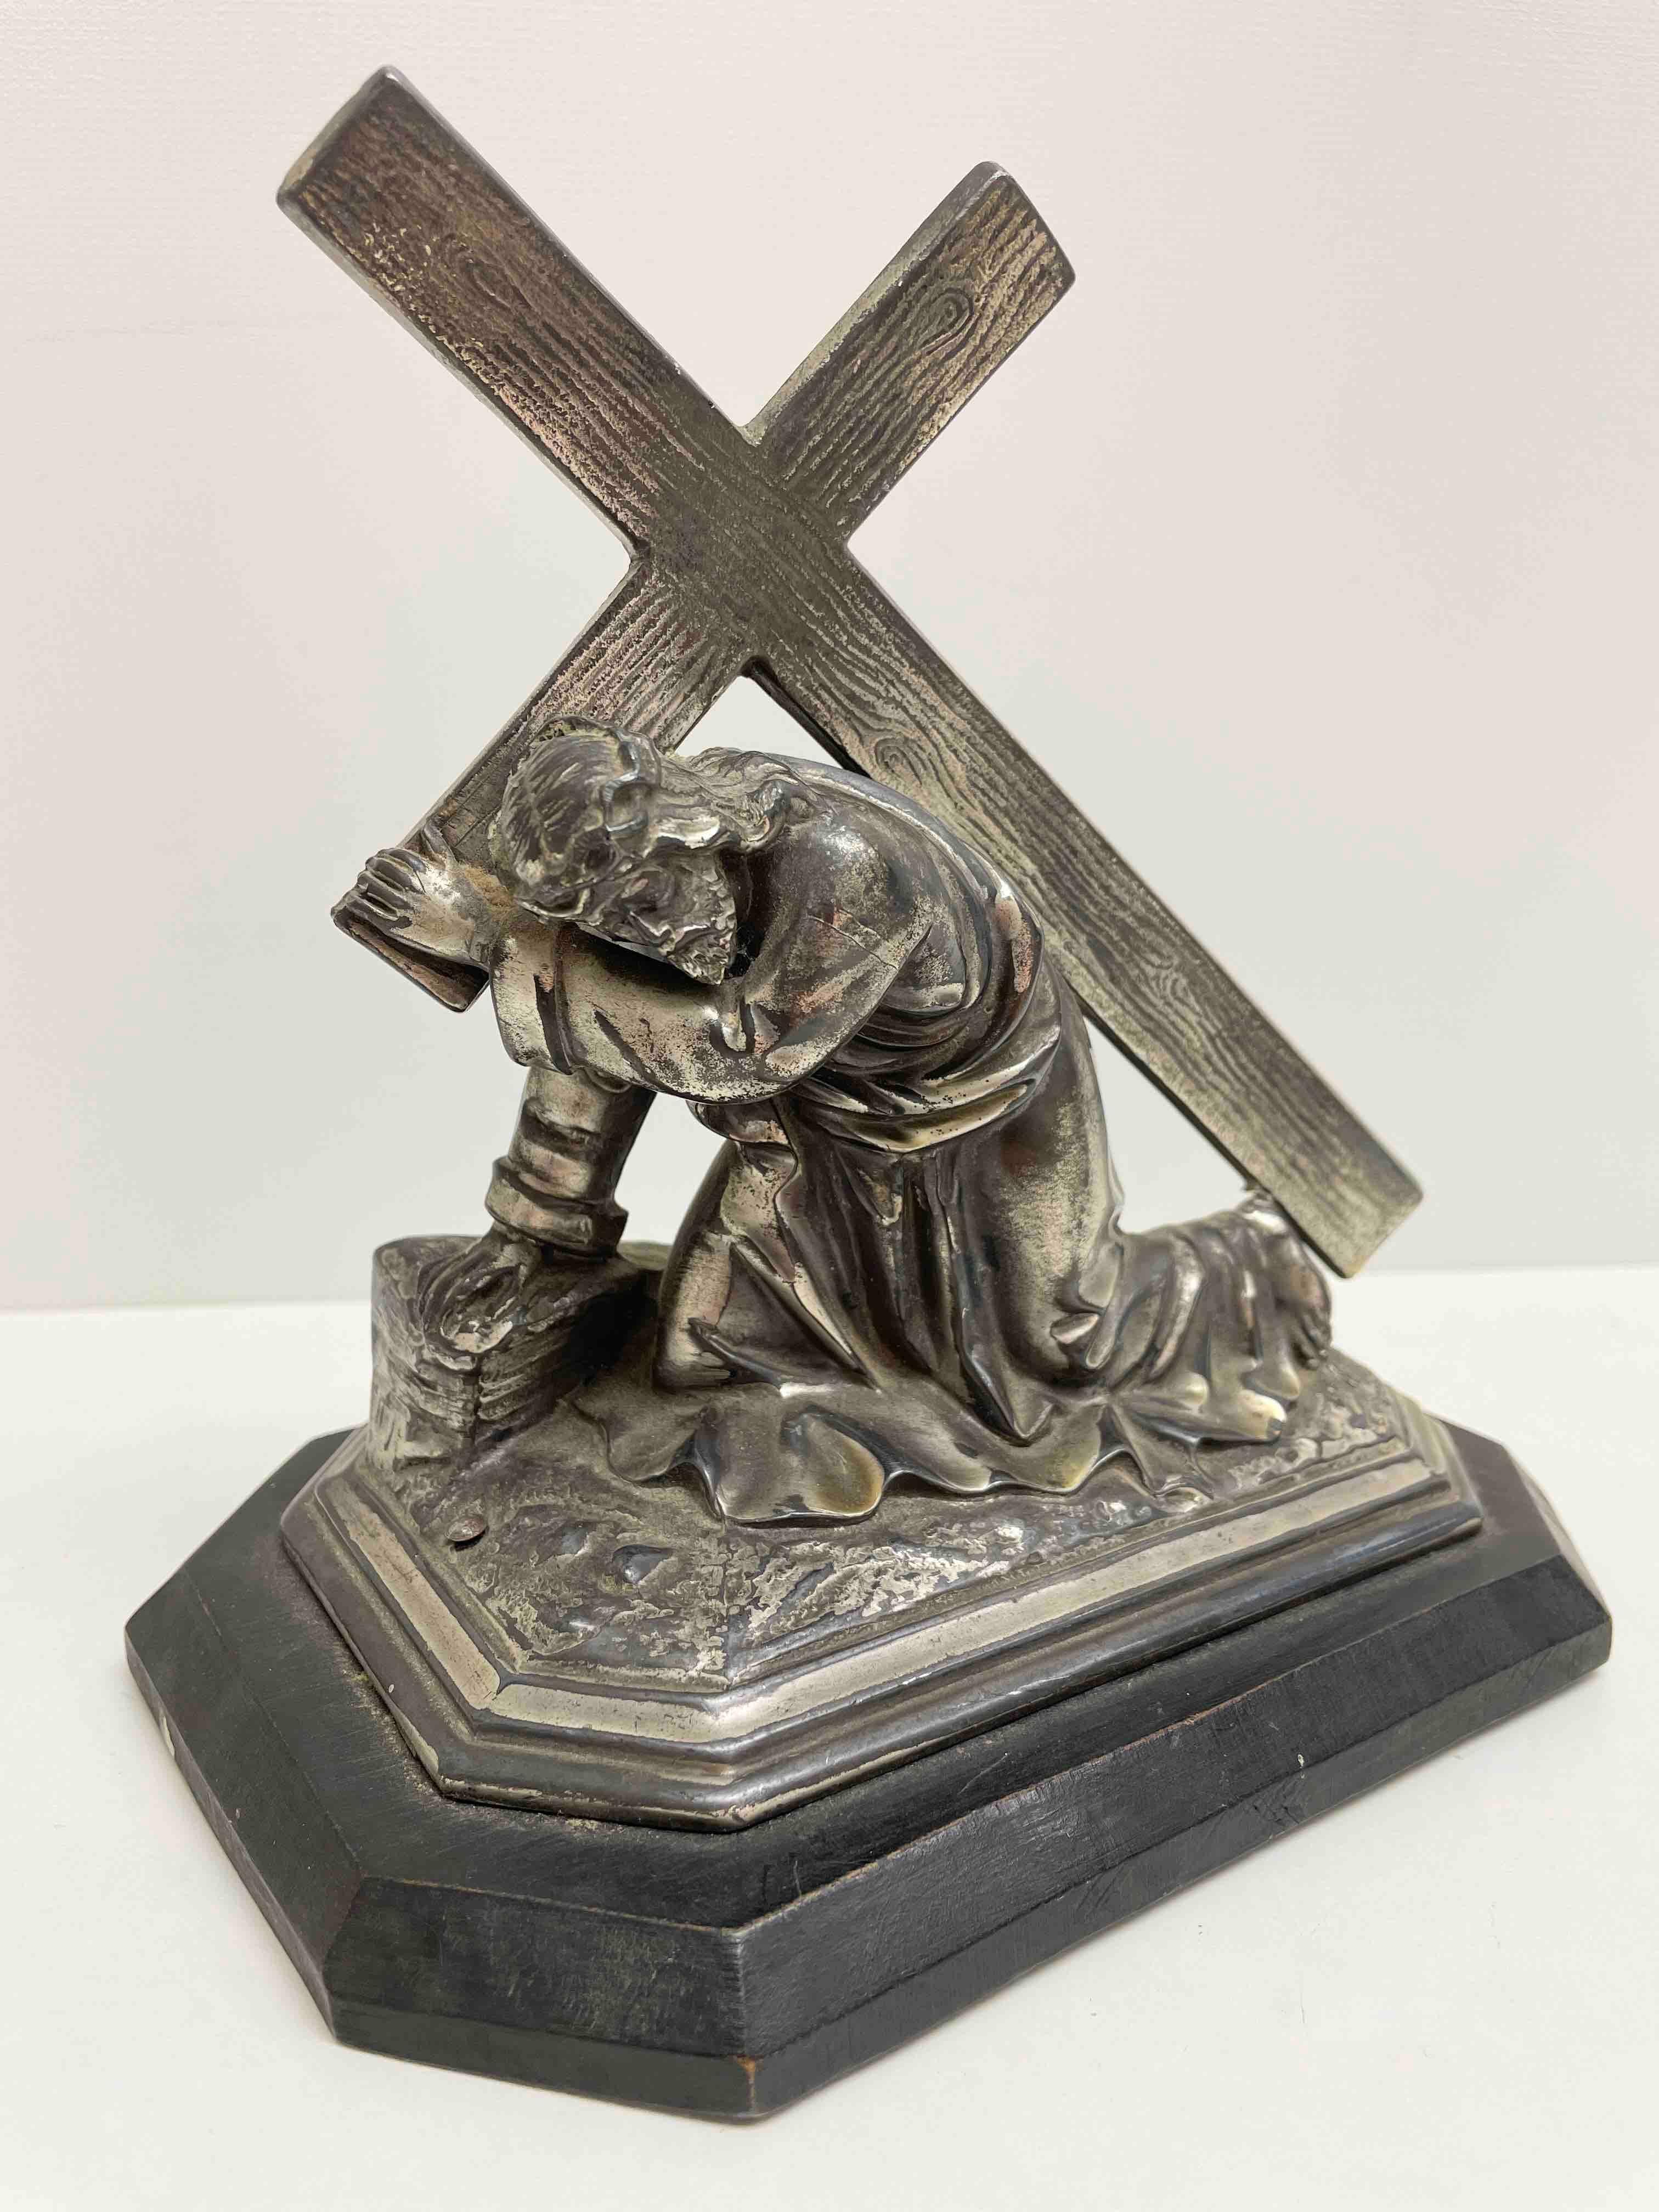 A classic decorative Jesus statue. Some wear with a nice patina, but this is old-age. Made of a kind of Metal (probably white metal) on a wooden base. Very decorative and nice to display in your library or any room.